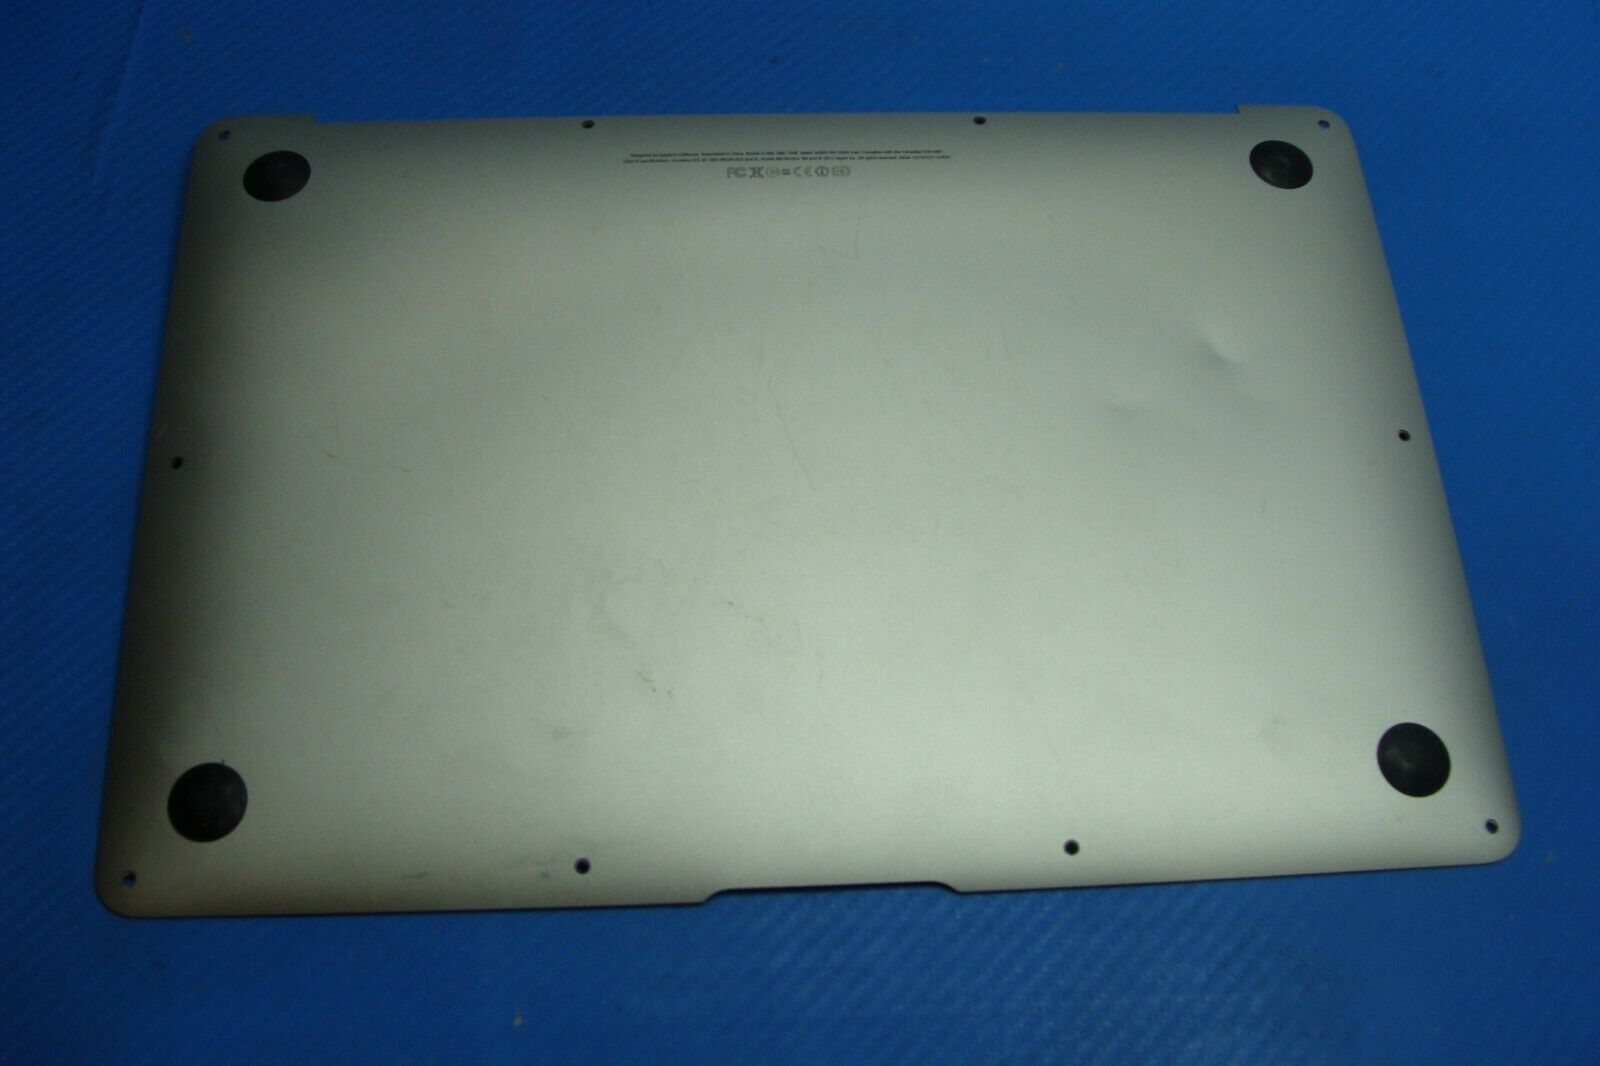 MacBook Air A1466 13" Mid 2012 MD231LL/A Bottom Case Silver 923-0129 - Laptop Parts - Buy Authentic Computer Parts - Top Seller Ebay